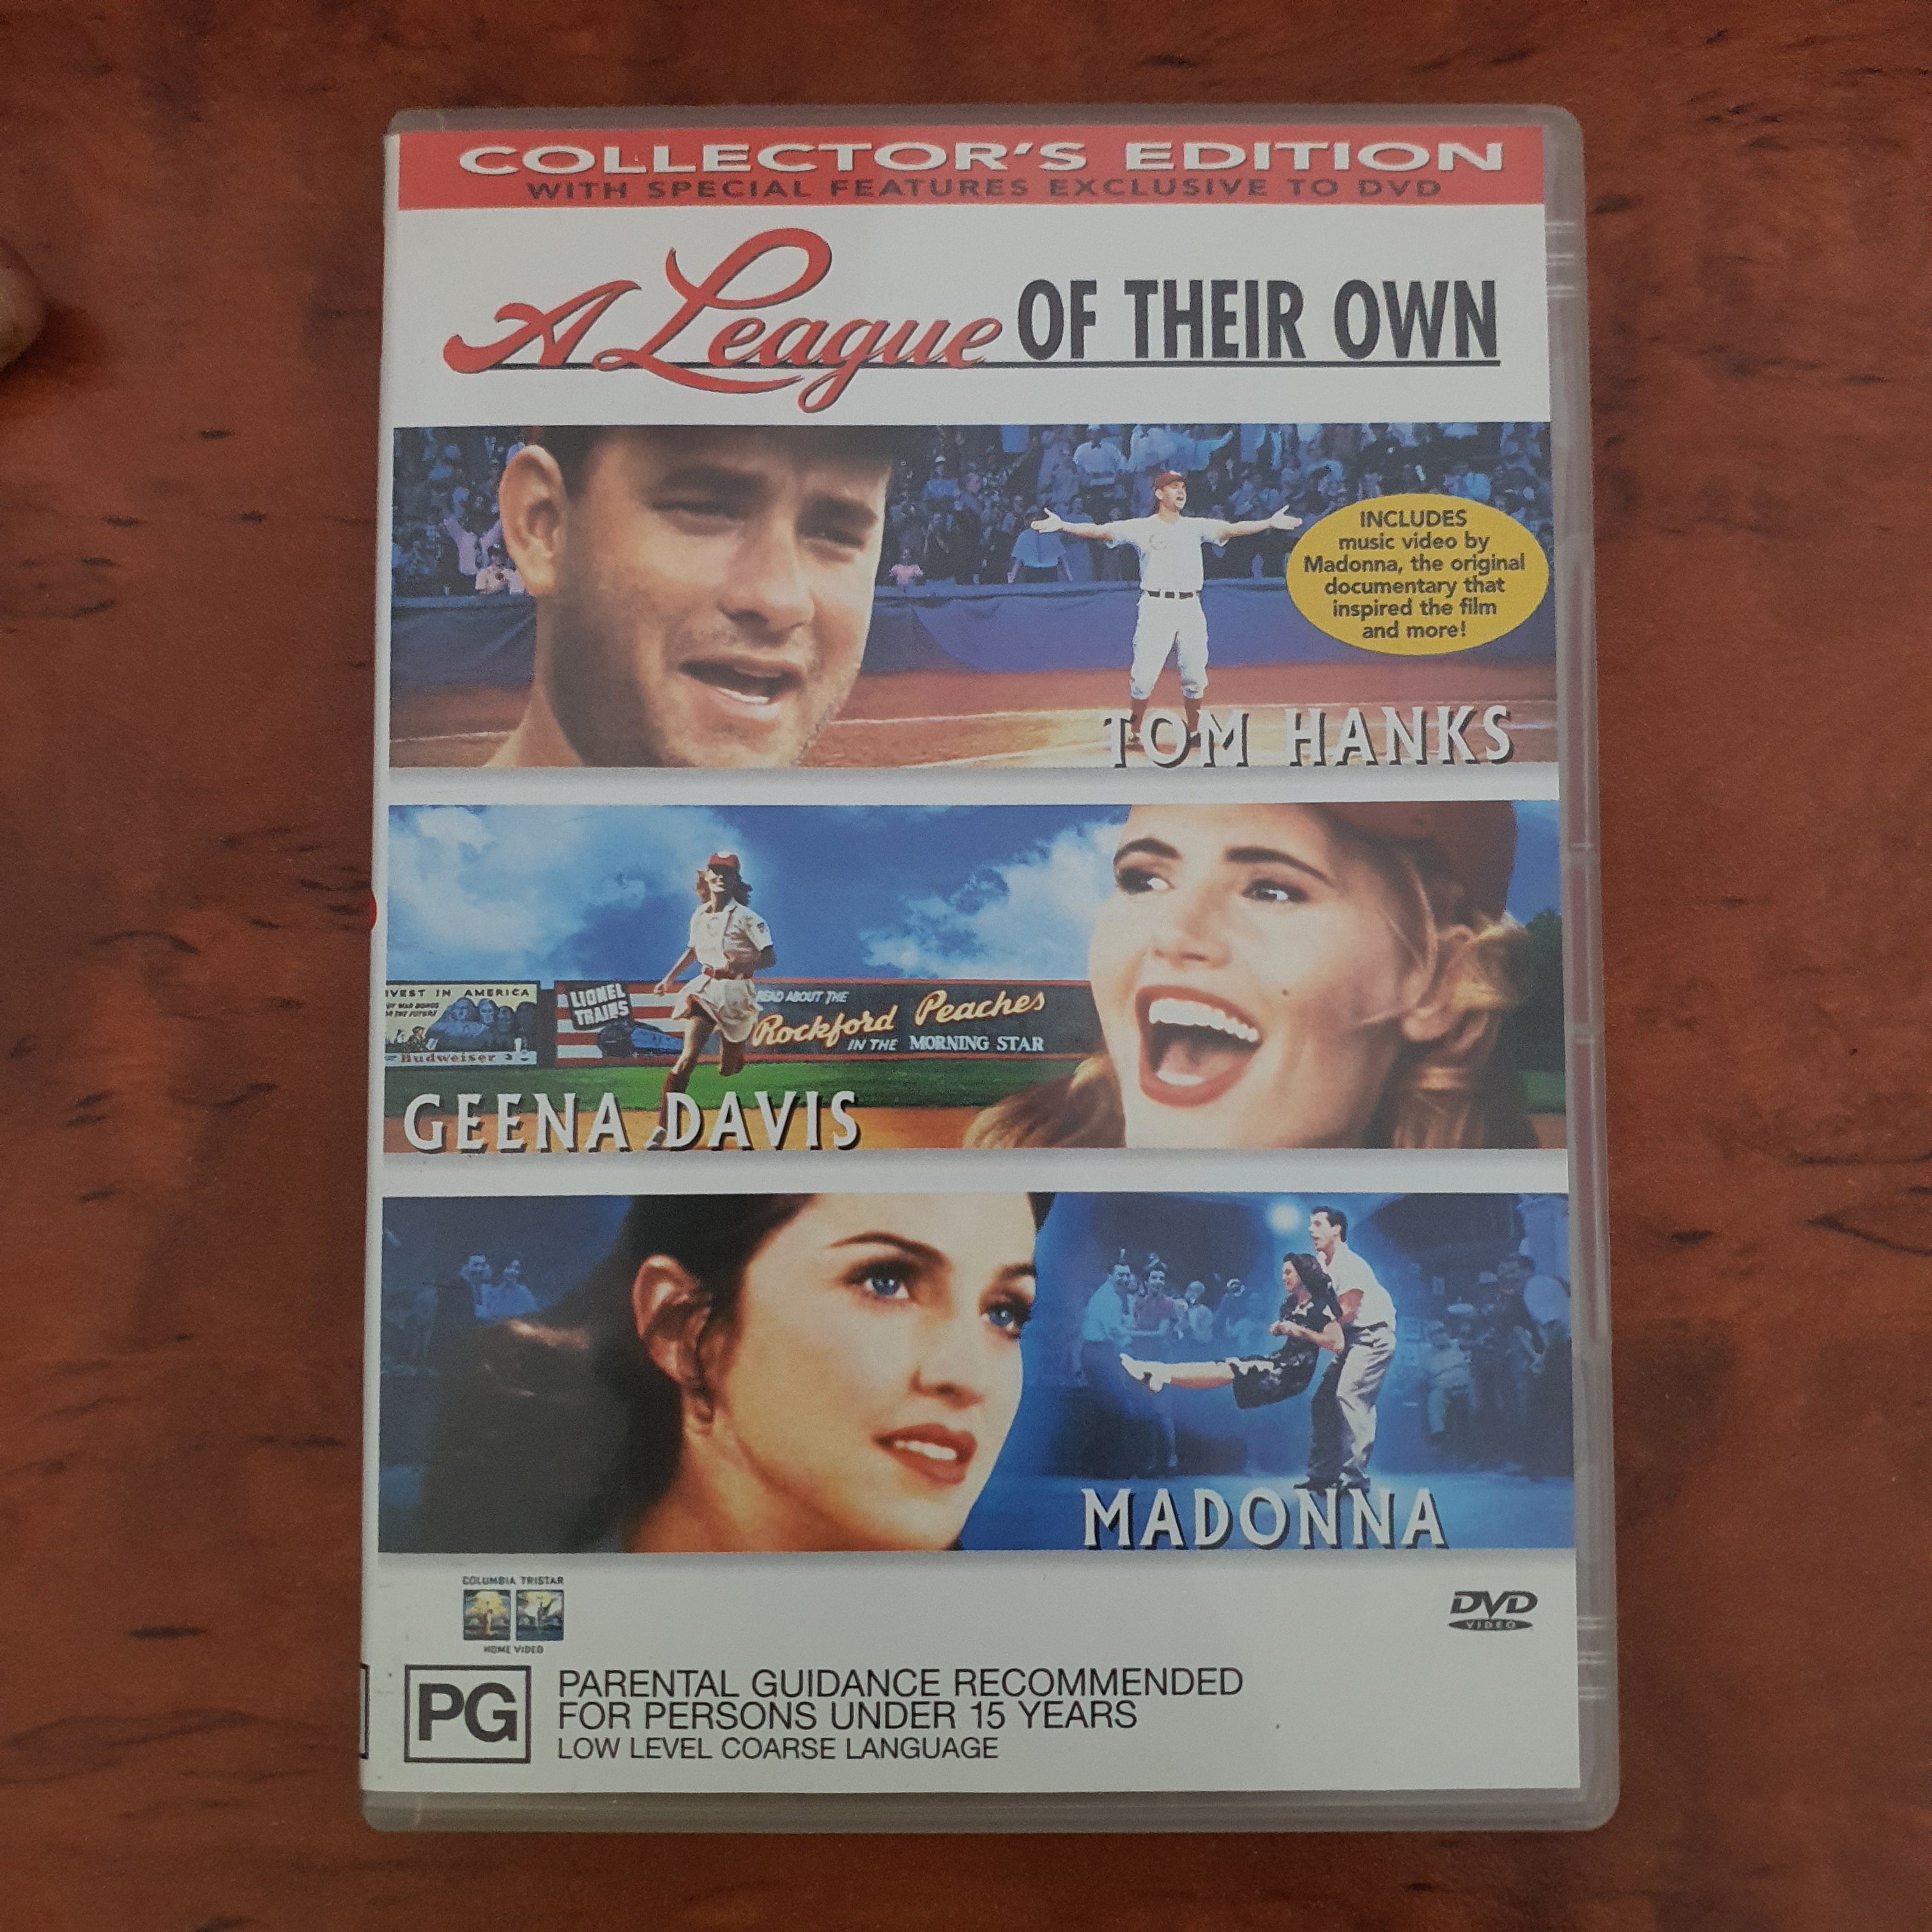 A LEAGUE OF THERE OWN COLLECTORS EDITION